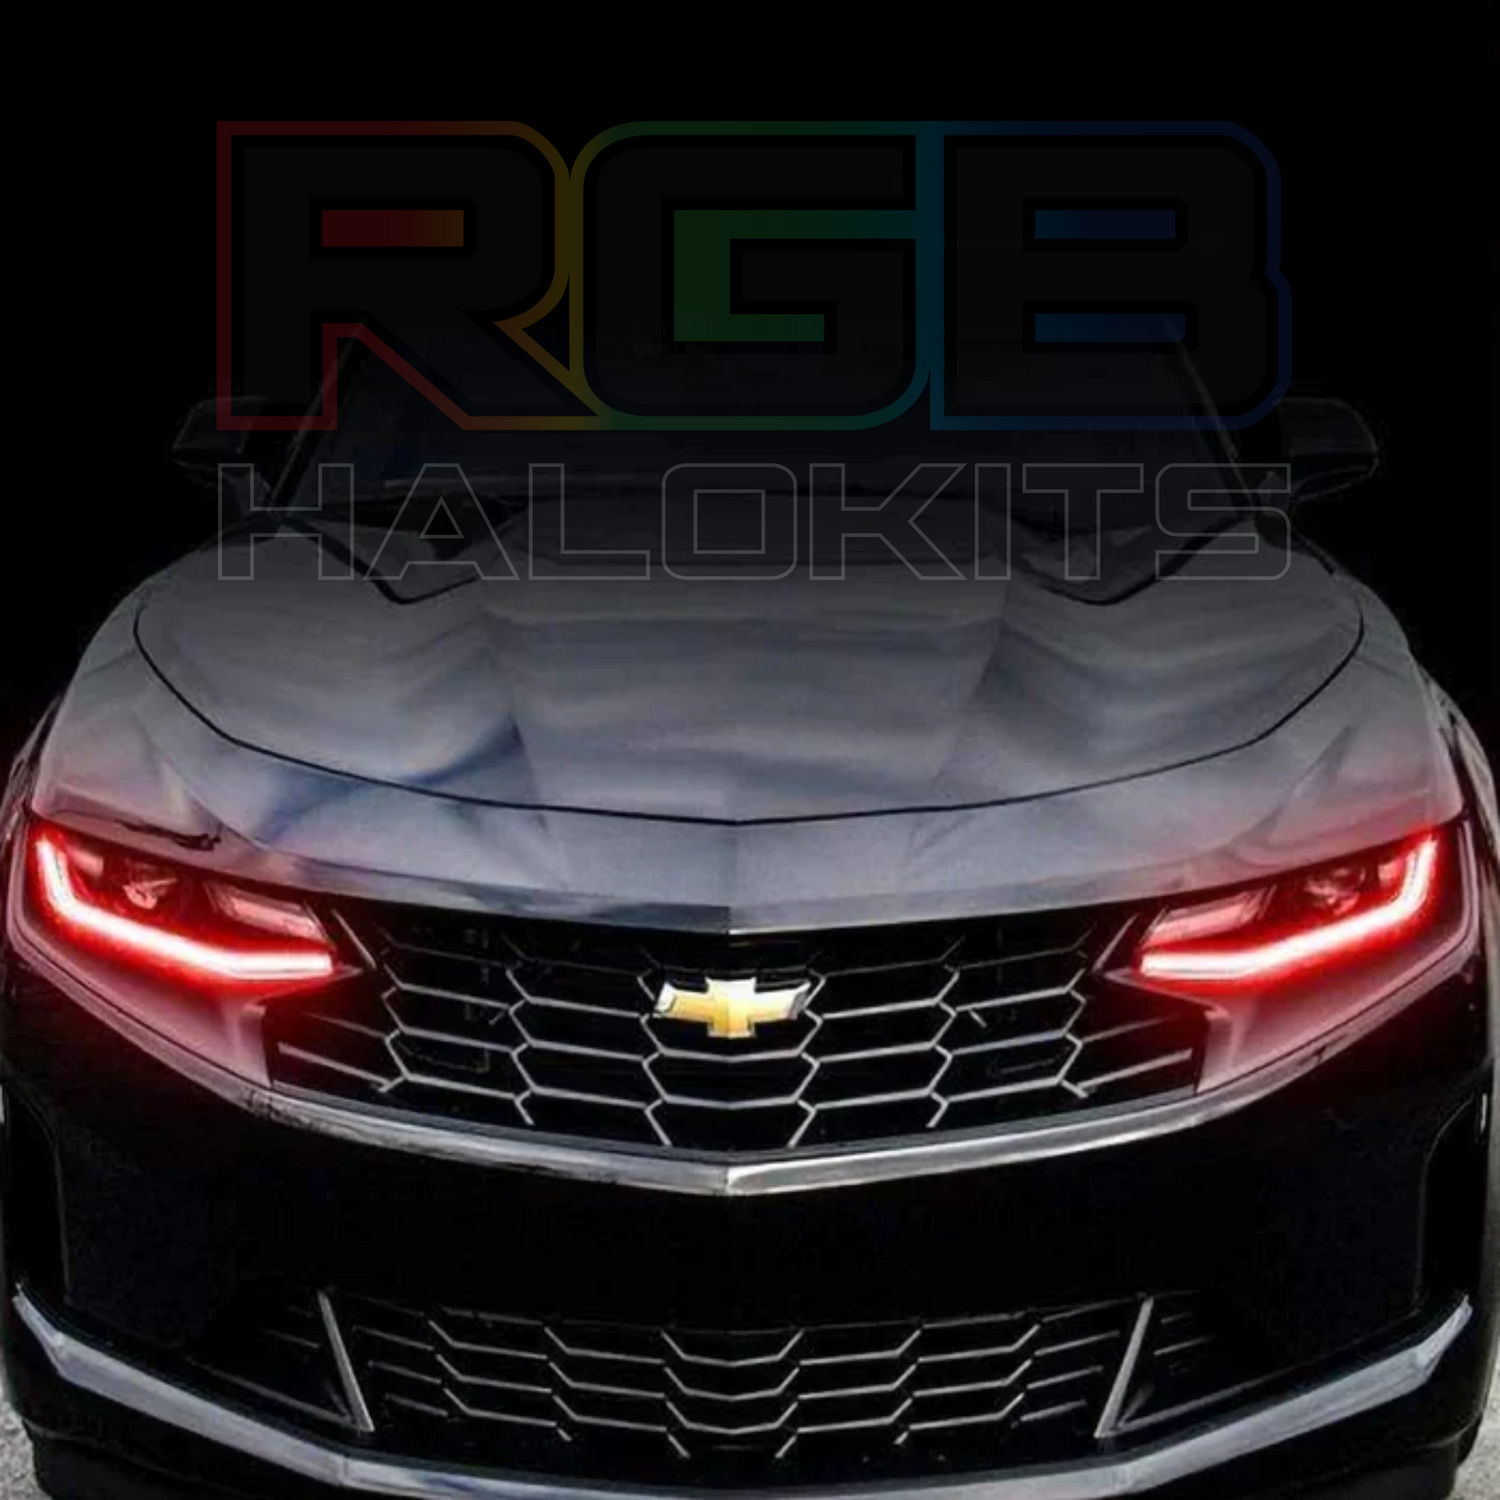 Chevrolet Camaro RGB DRL Strips (Waterproof Exterior Mount) Install Guide